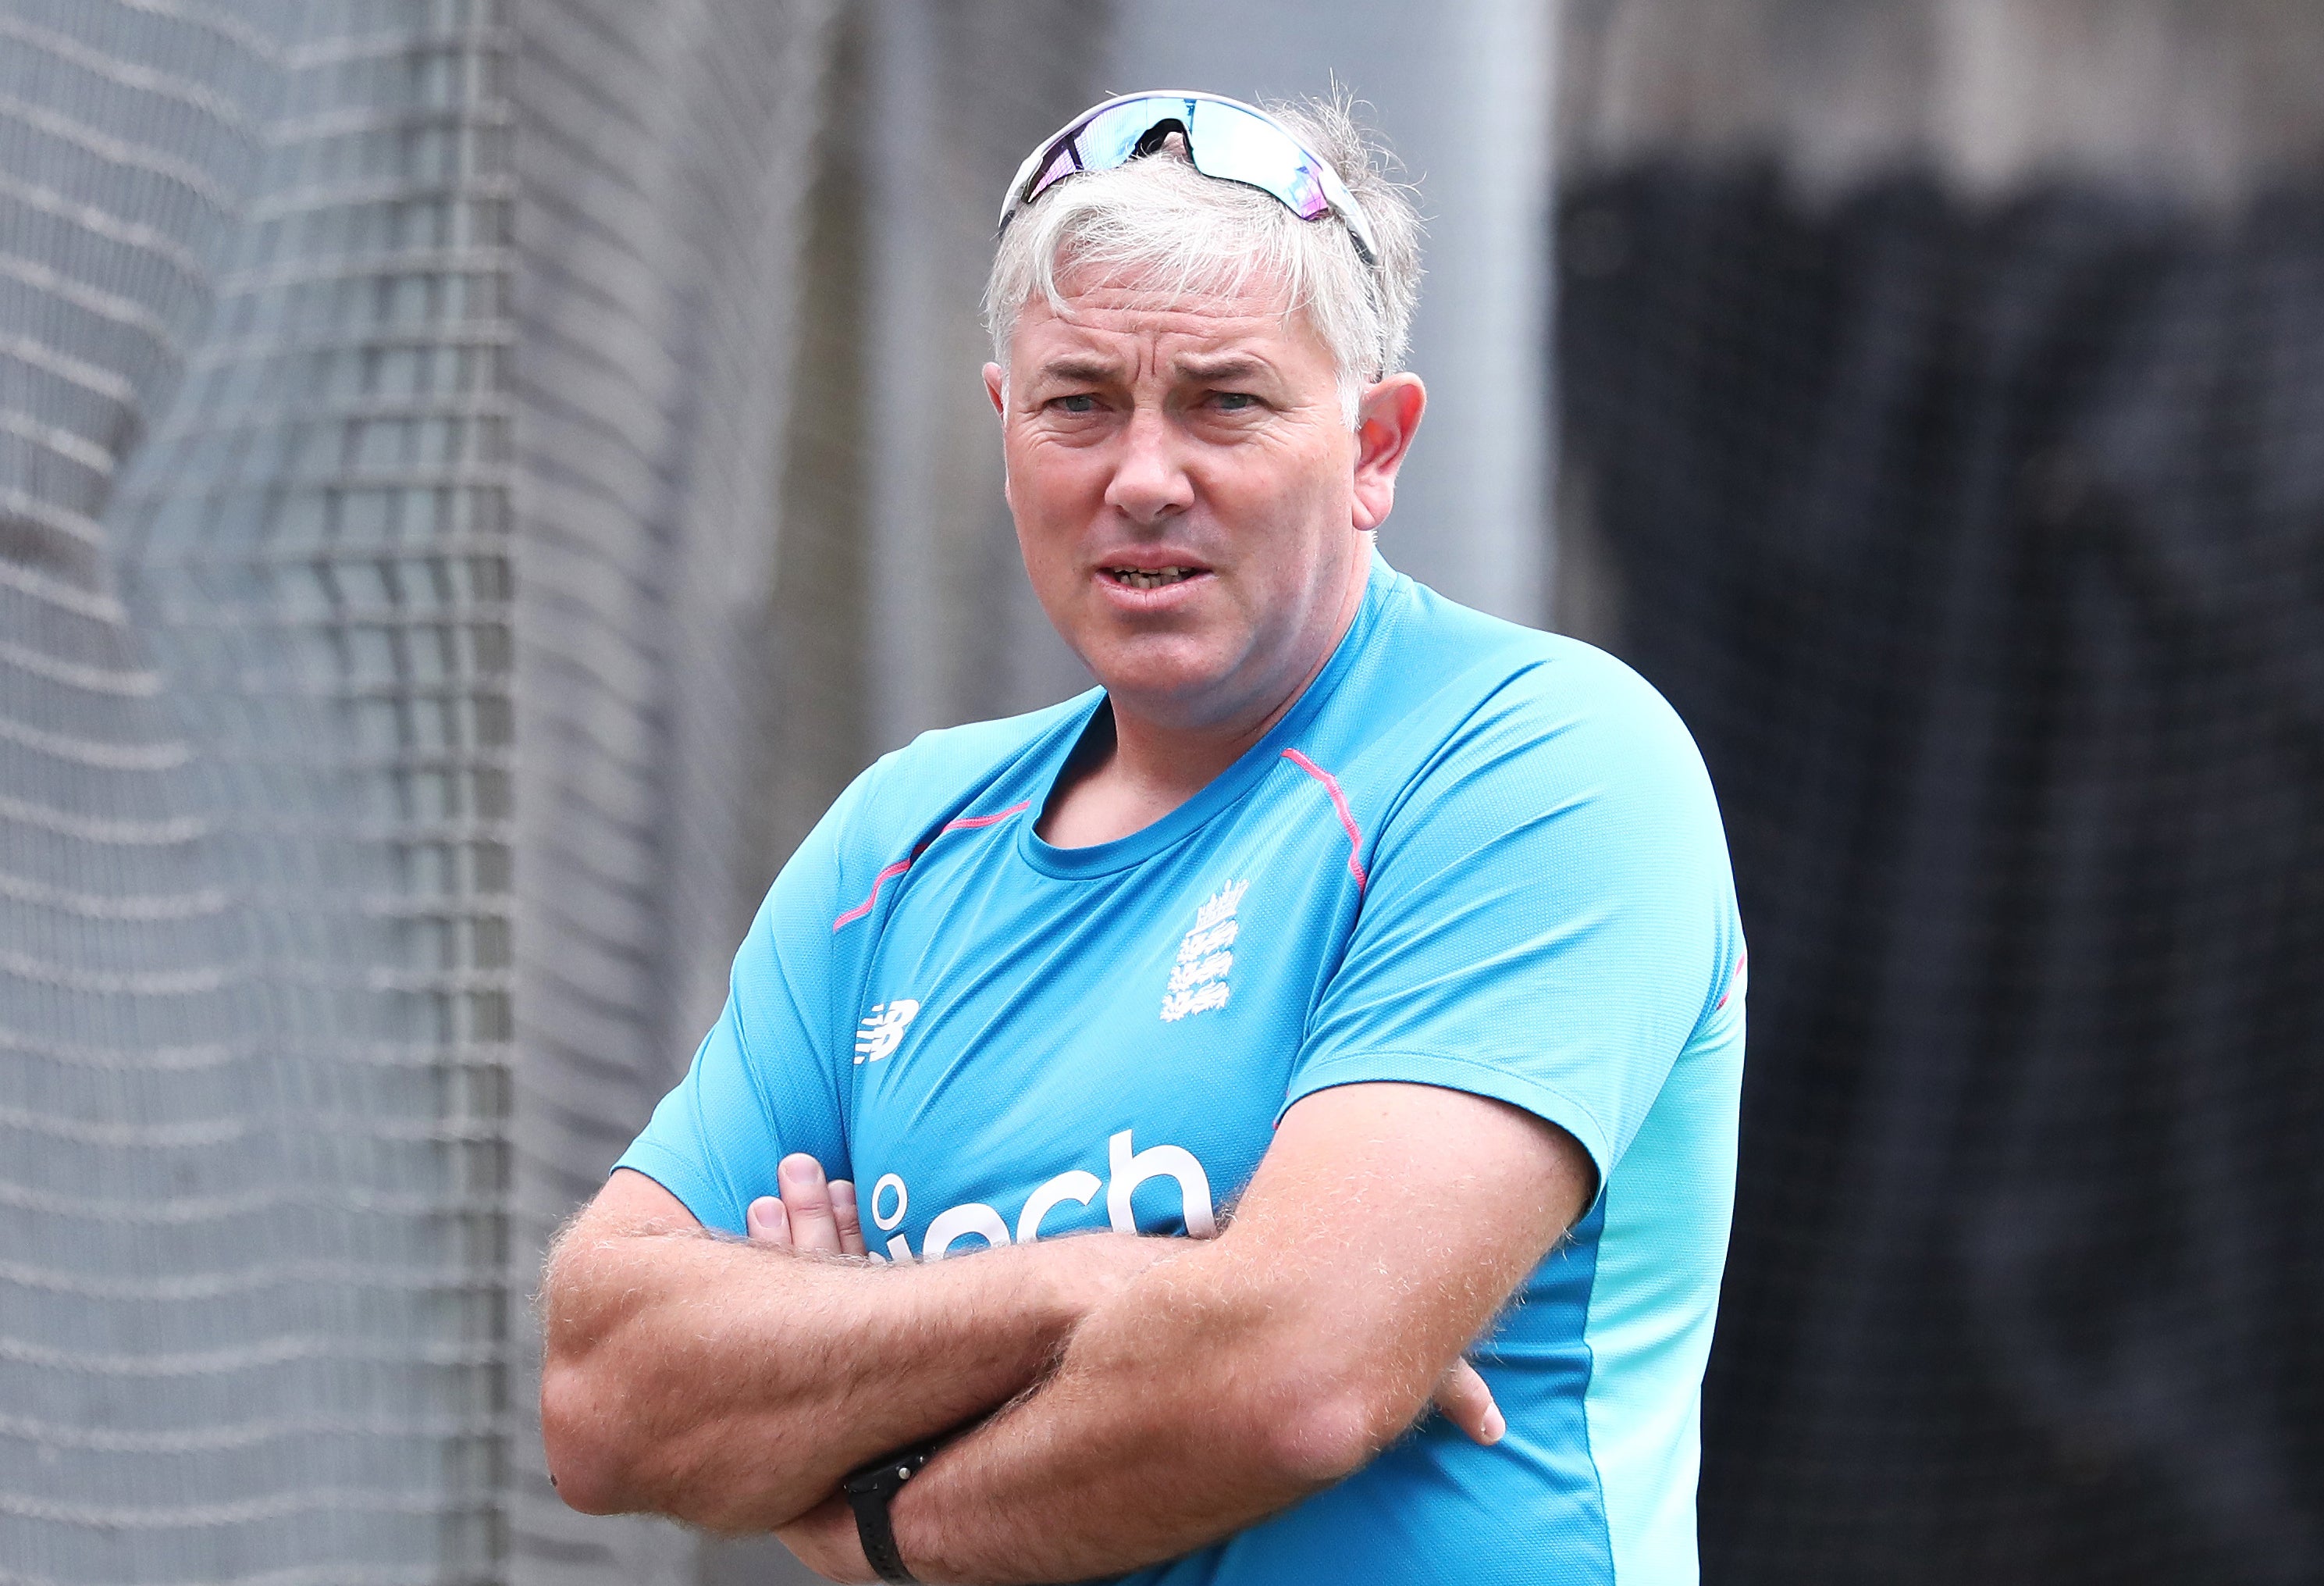 Will England coach Chris Silverwood make changes in winning team ahead of  2nd Test? here's what he said